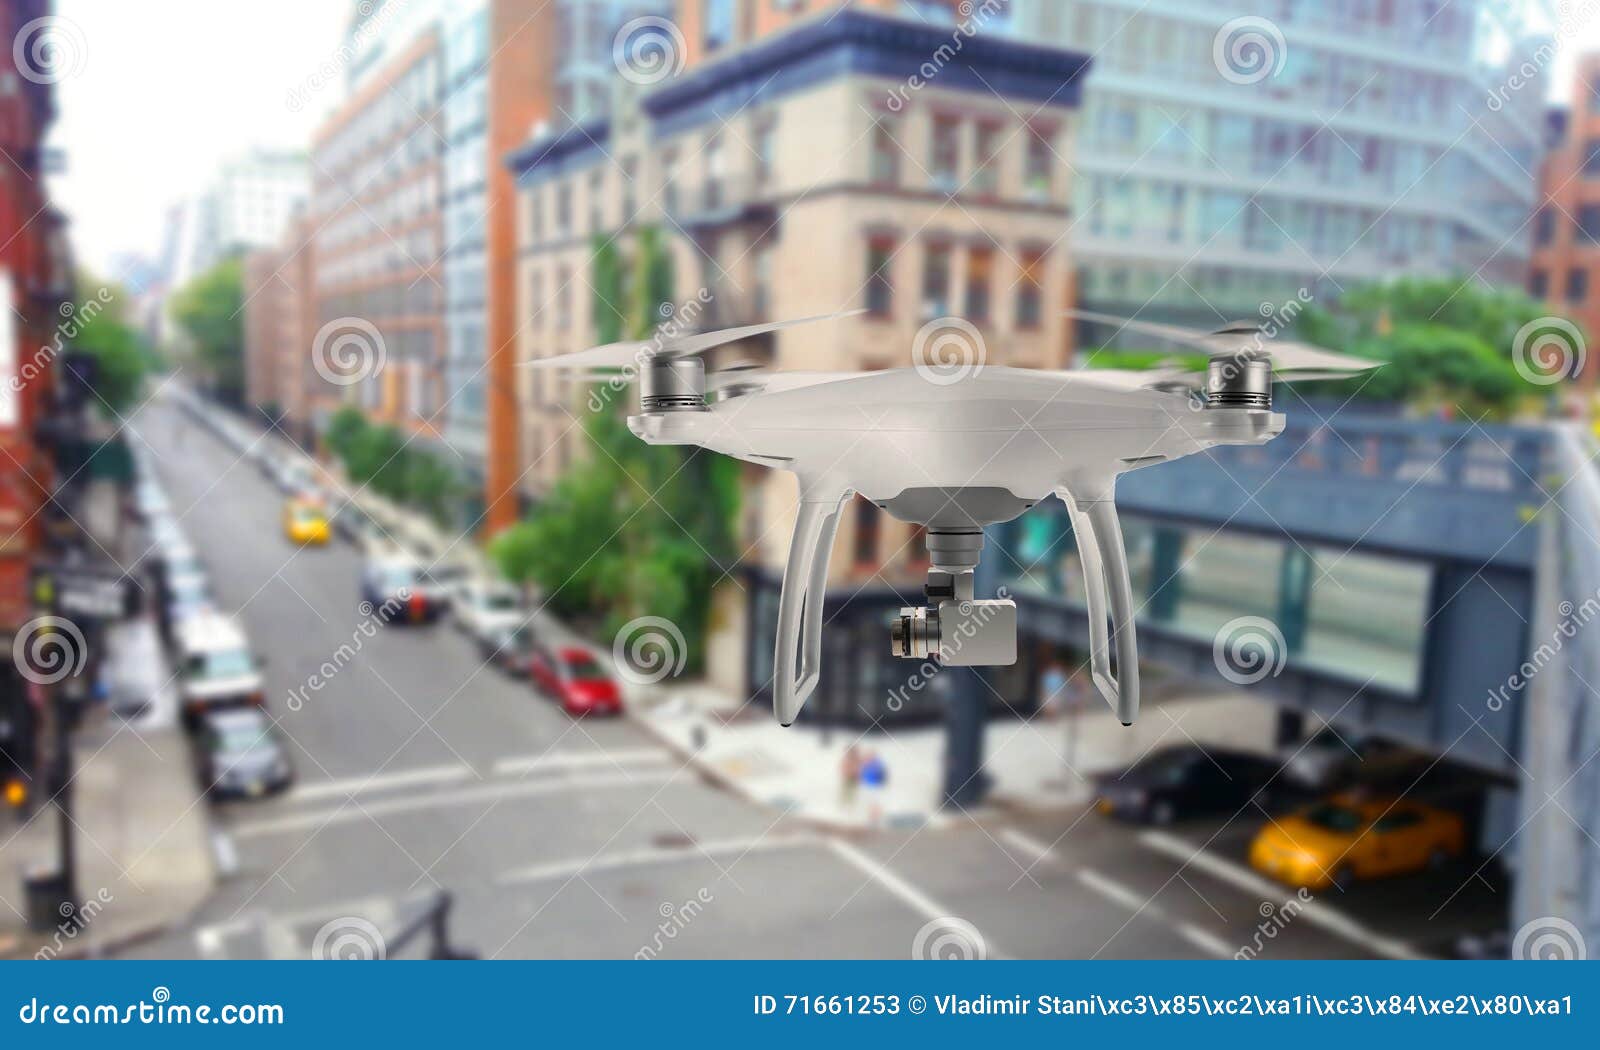 drone quad copter with camera oversees the city streets